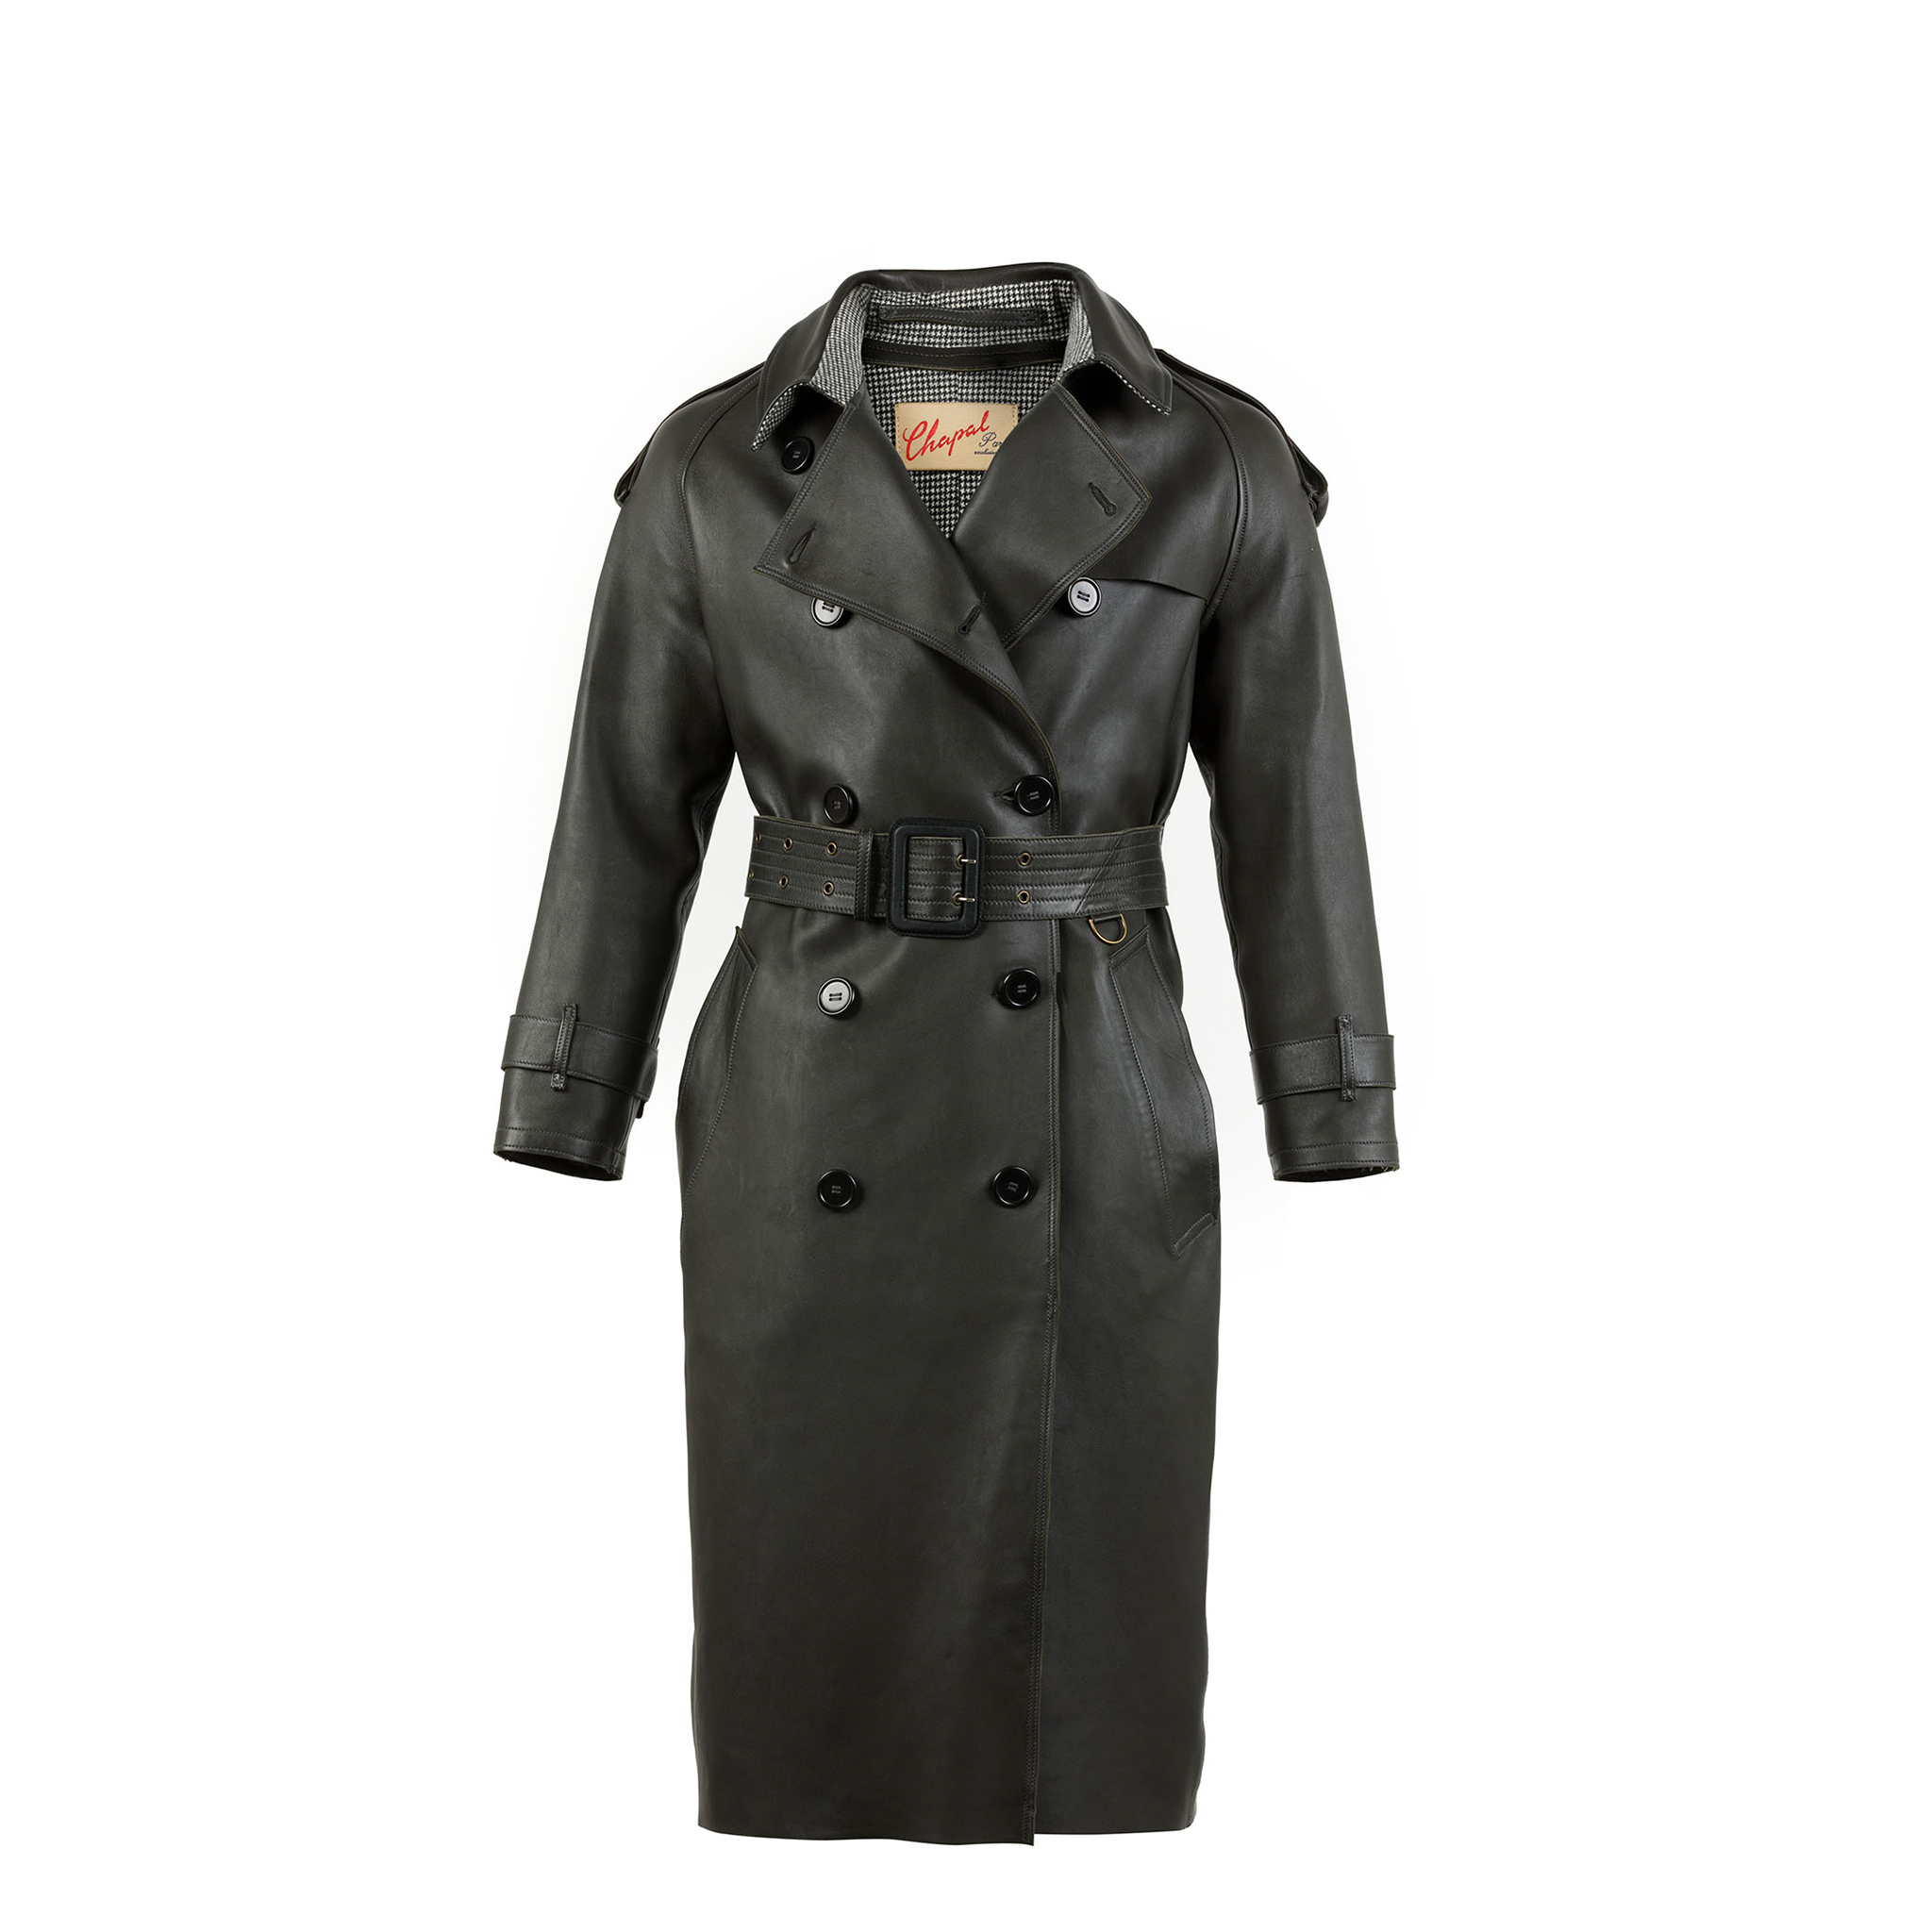 Trench Coat - Glossy leather - Anthracite color